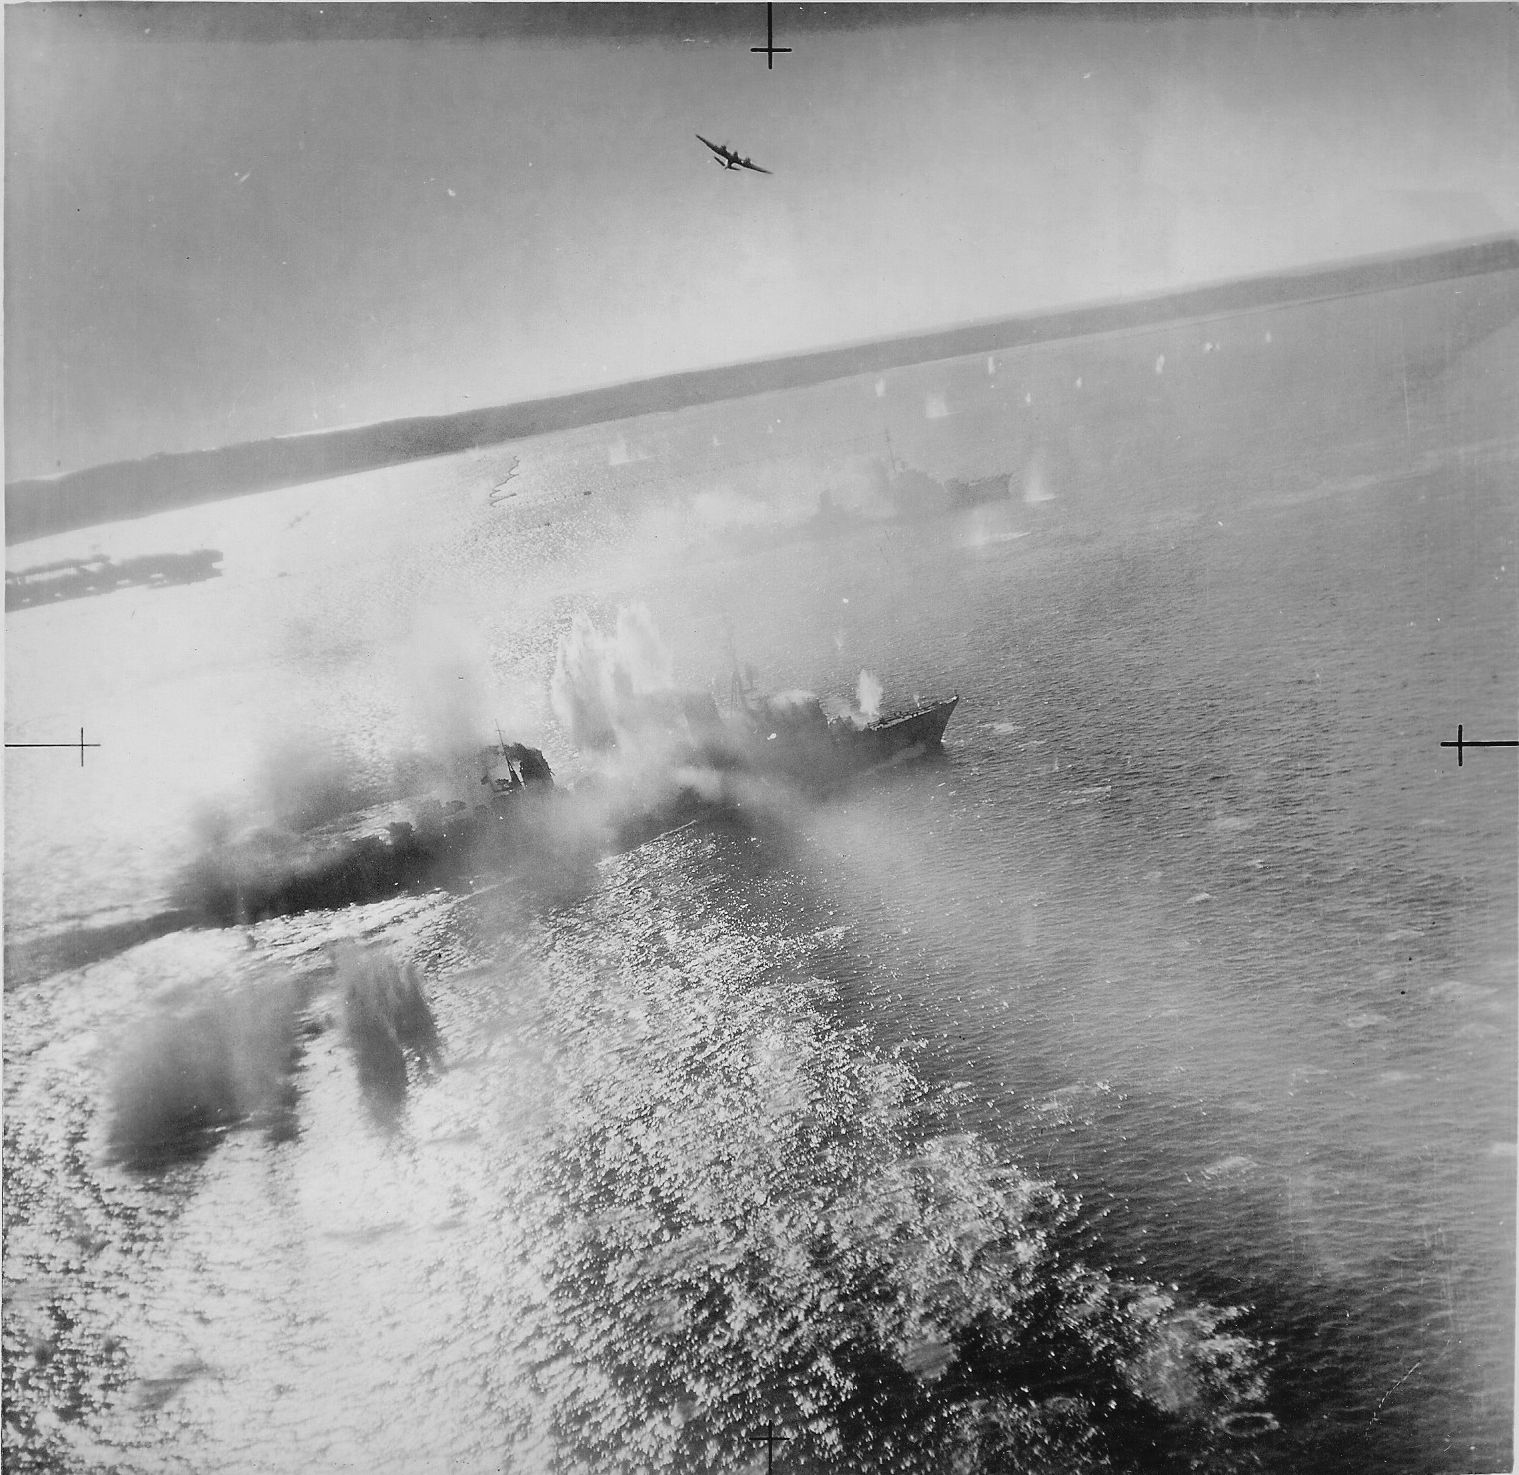 German_warships_T-24_Z-24_under_attack_by_Beaufighters